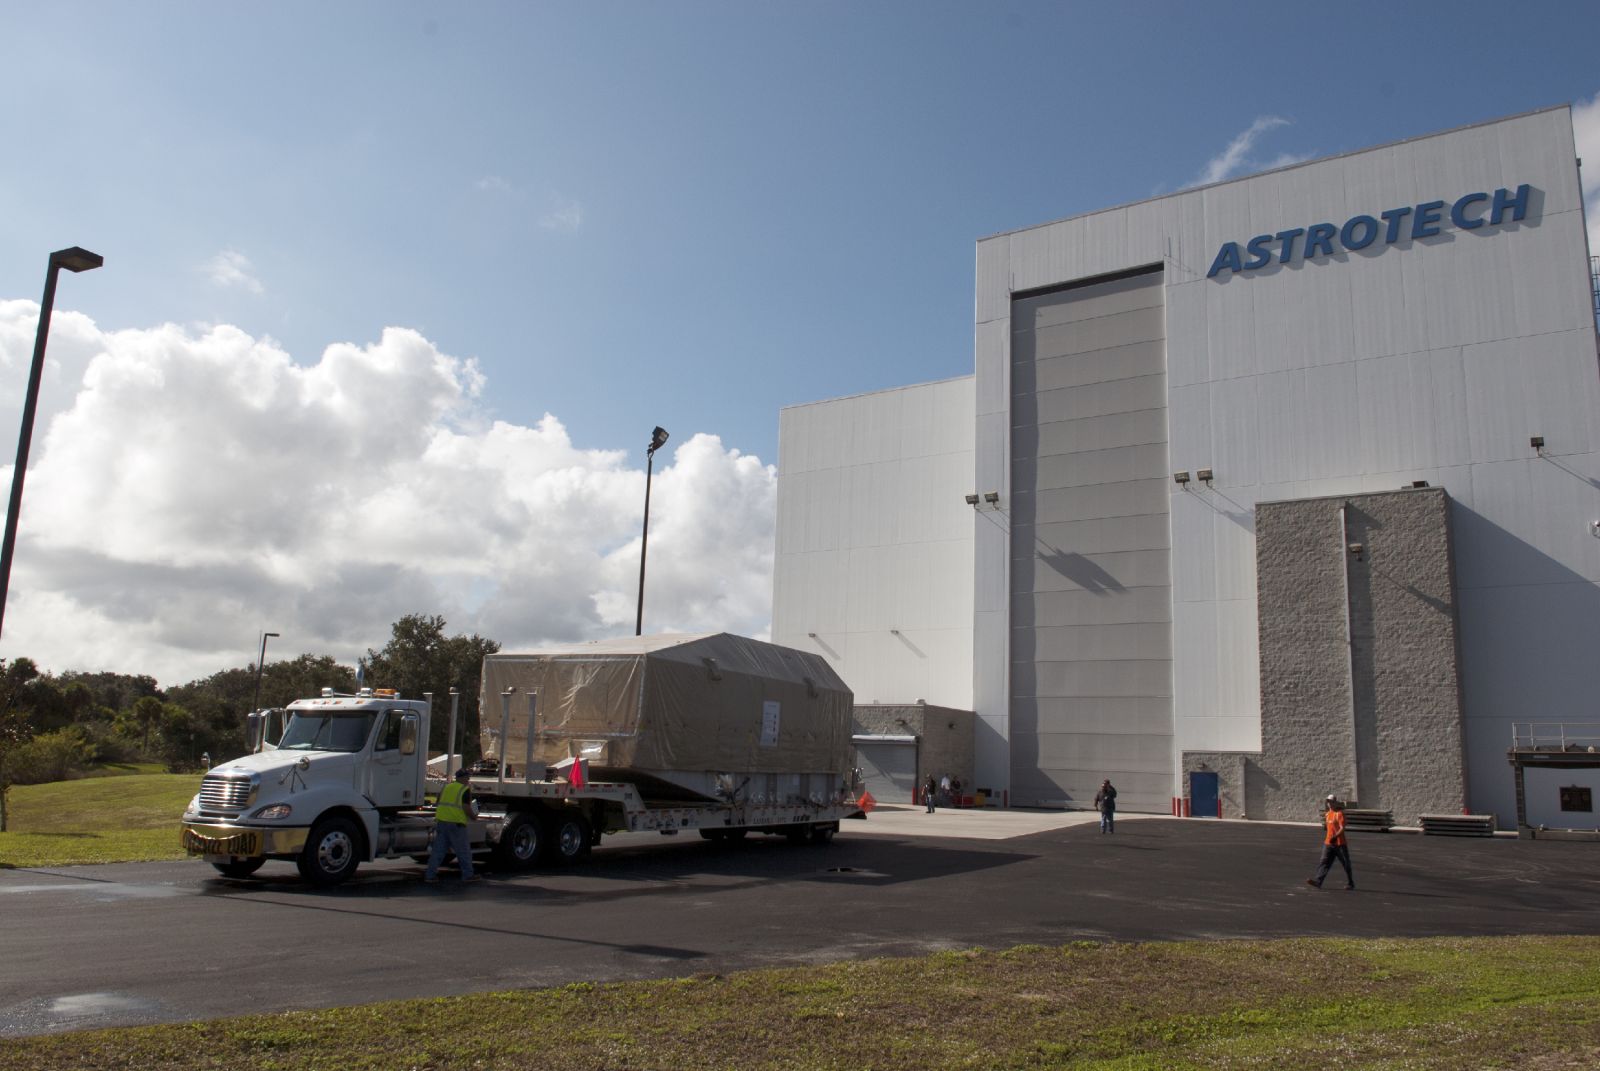 A truck hauls NASA's TDRS-L satellite to the Astrotech facility in Titusville